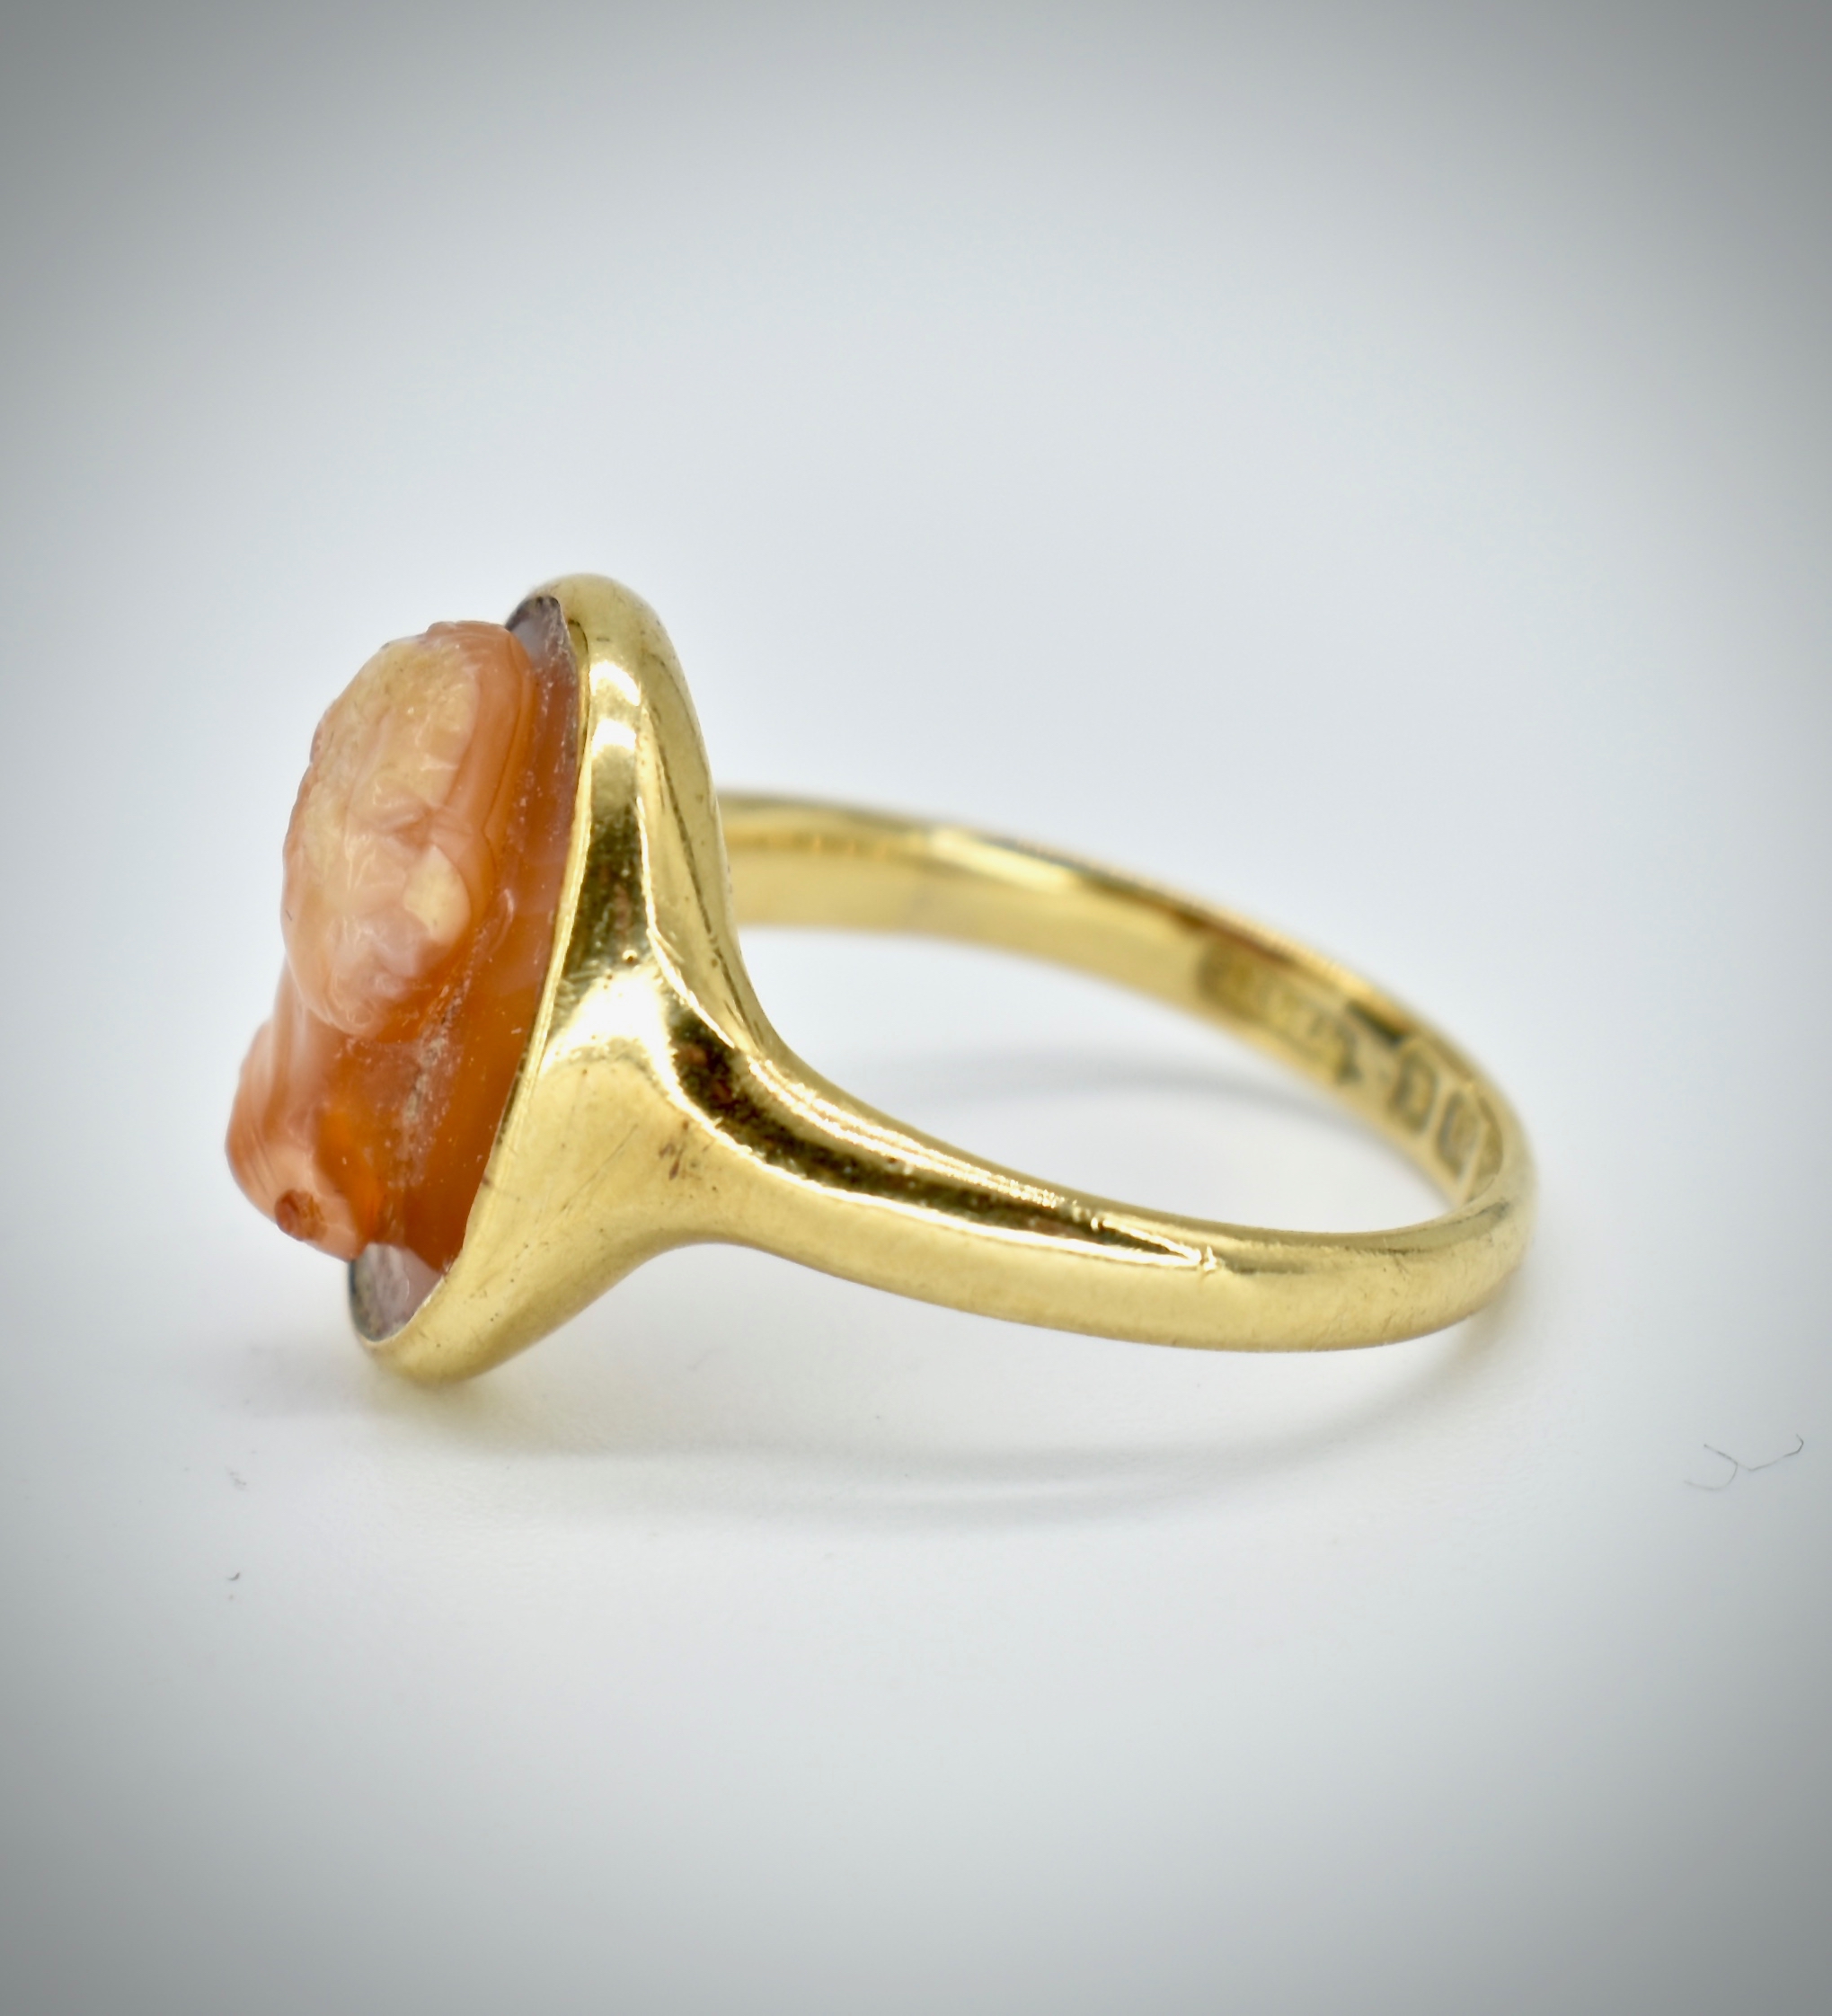 Hallmarked antique 18ct Gold Cameo Ring - Image 3 of 7